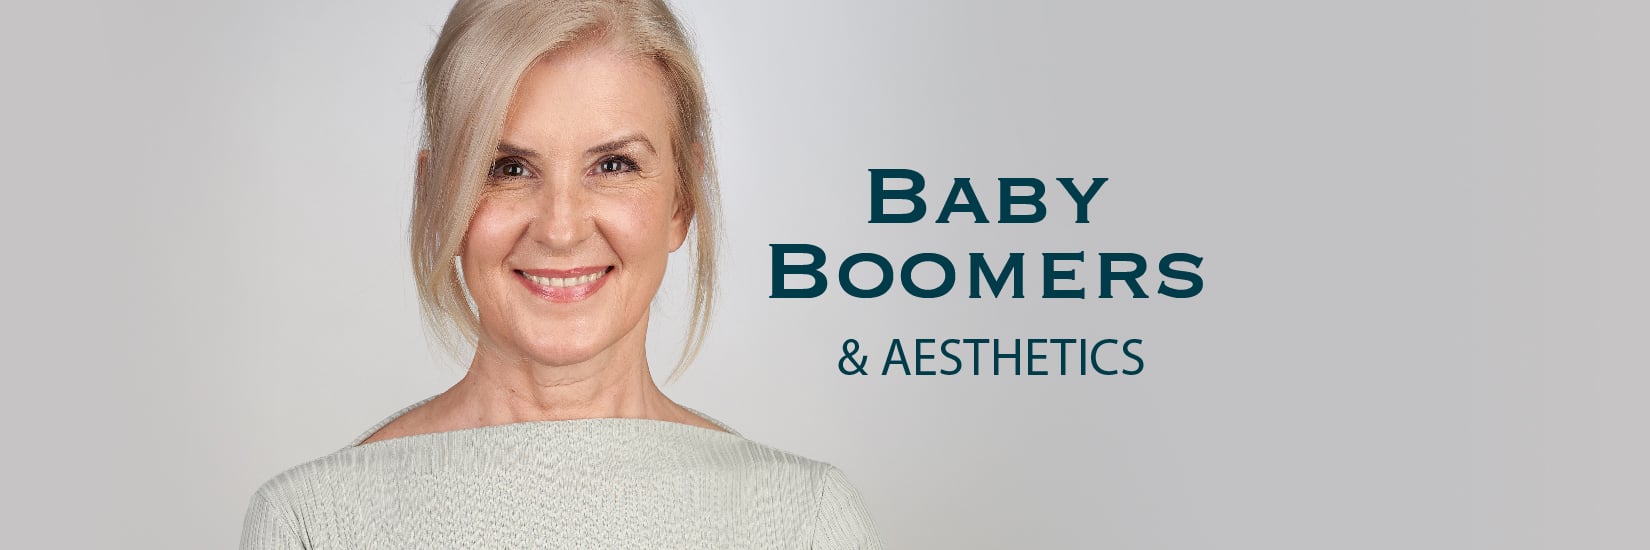 Baby Boomers and the Aesthetic Treatments They Prefer